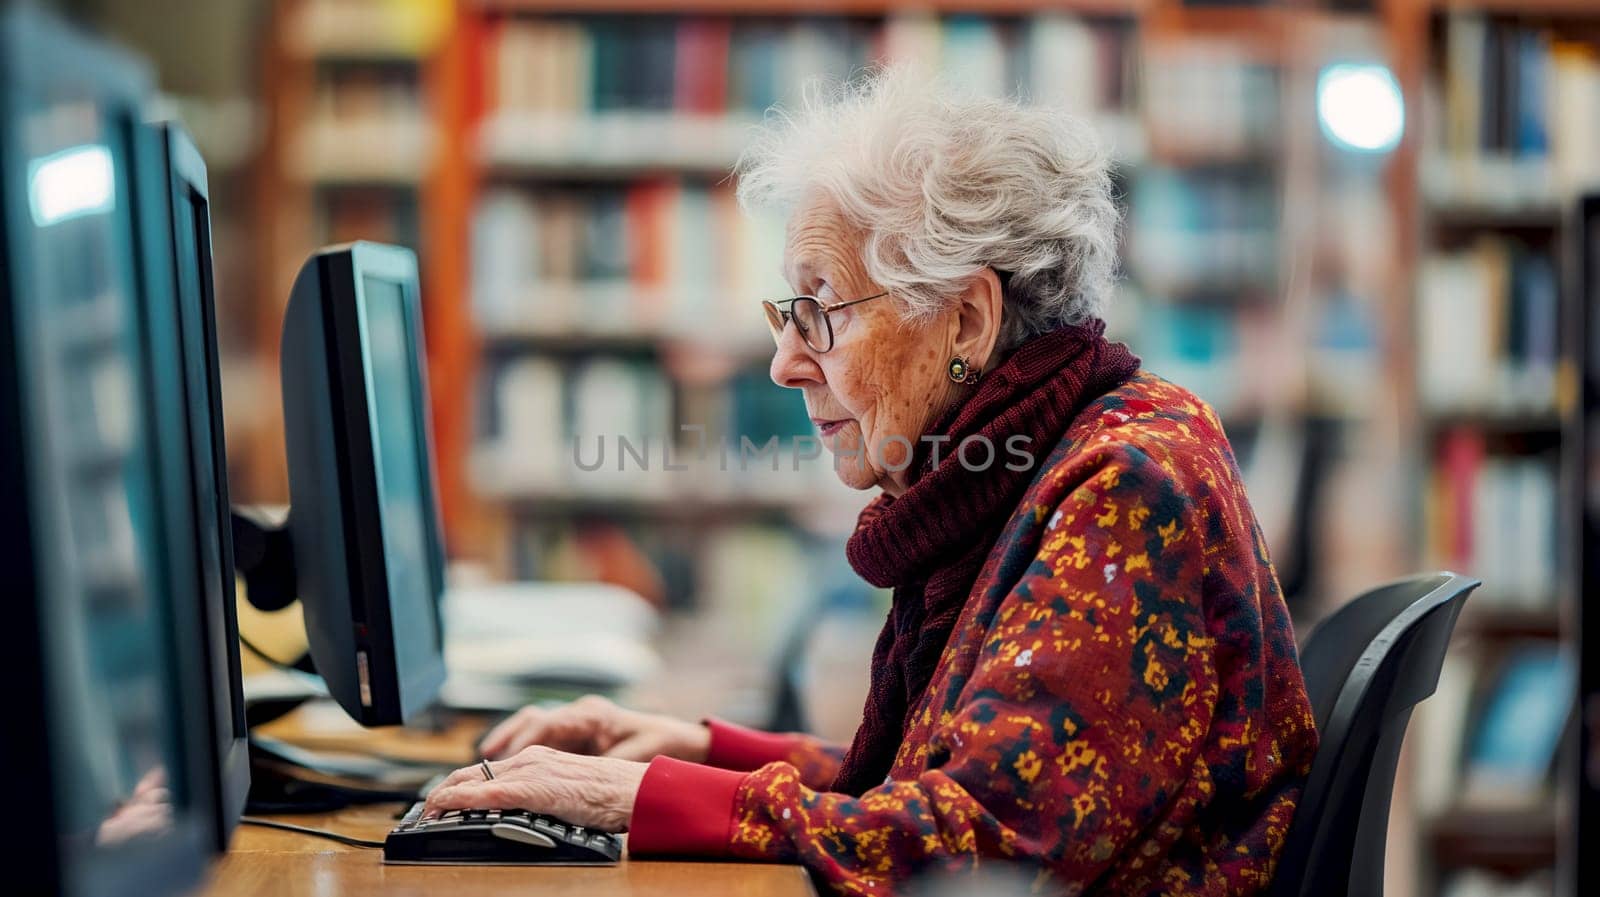 Elderly Woman Using Computer at Library by chrisroll